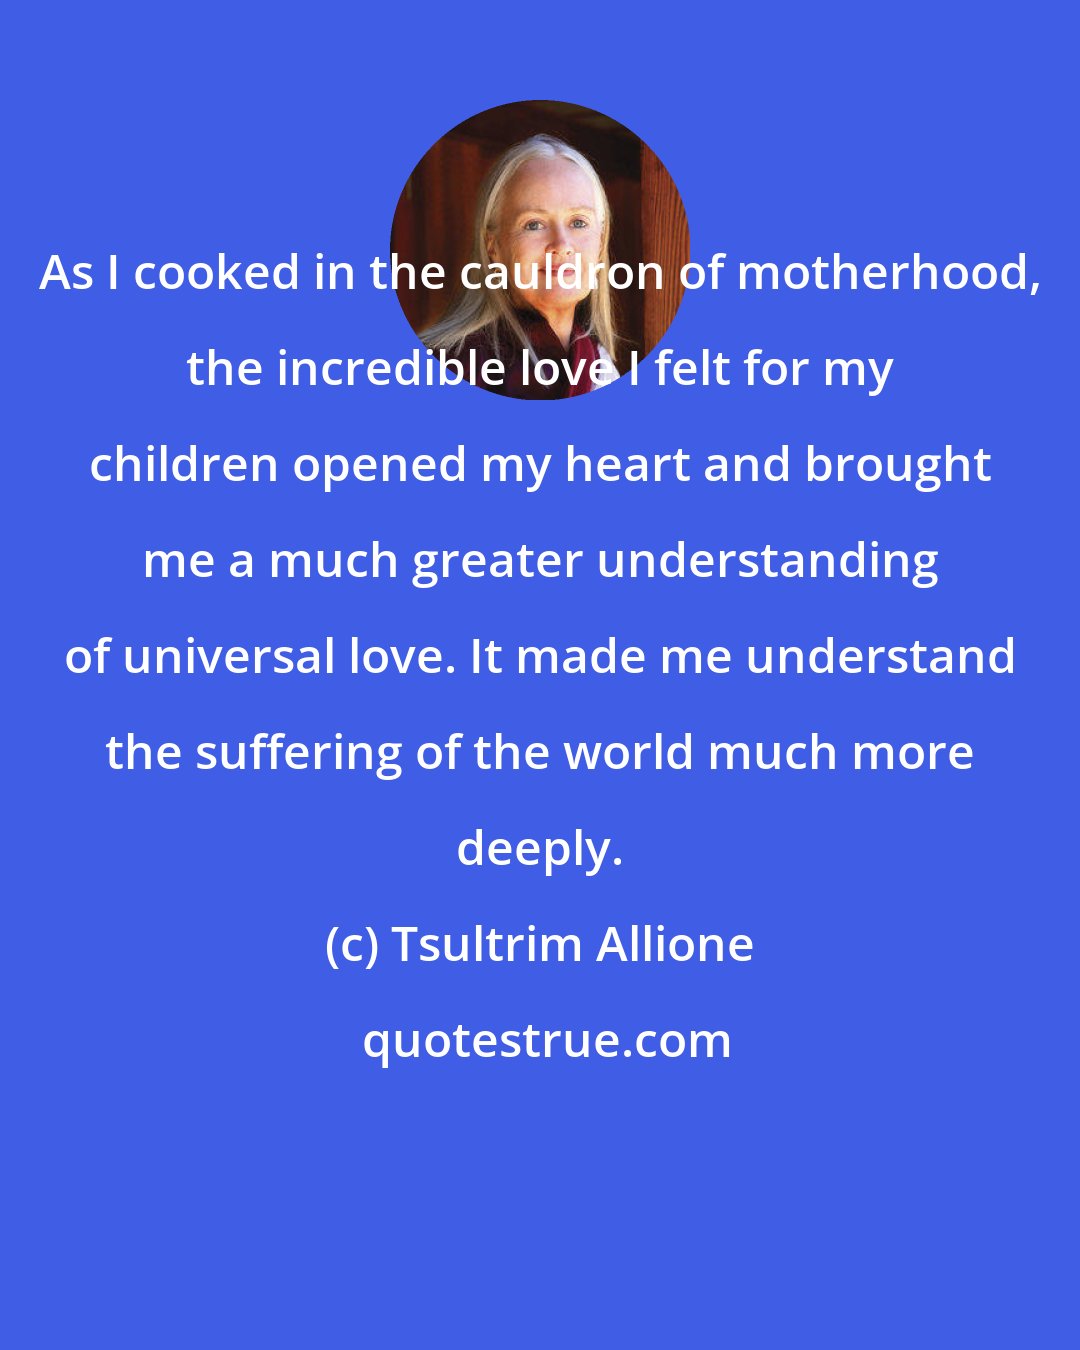 Tsultrim Allione: As I cooked in the cauldron of motherhood, the incredible love I felt for my children opened my heart and brought me a much greater understanding of universal love. It made me understand the suffering of the world much more deeply.